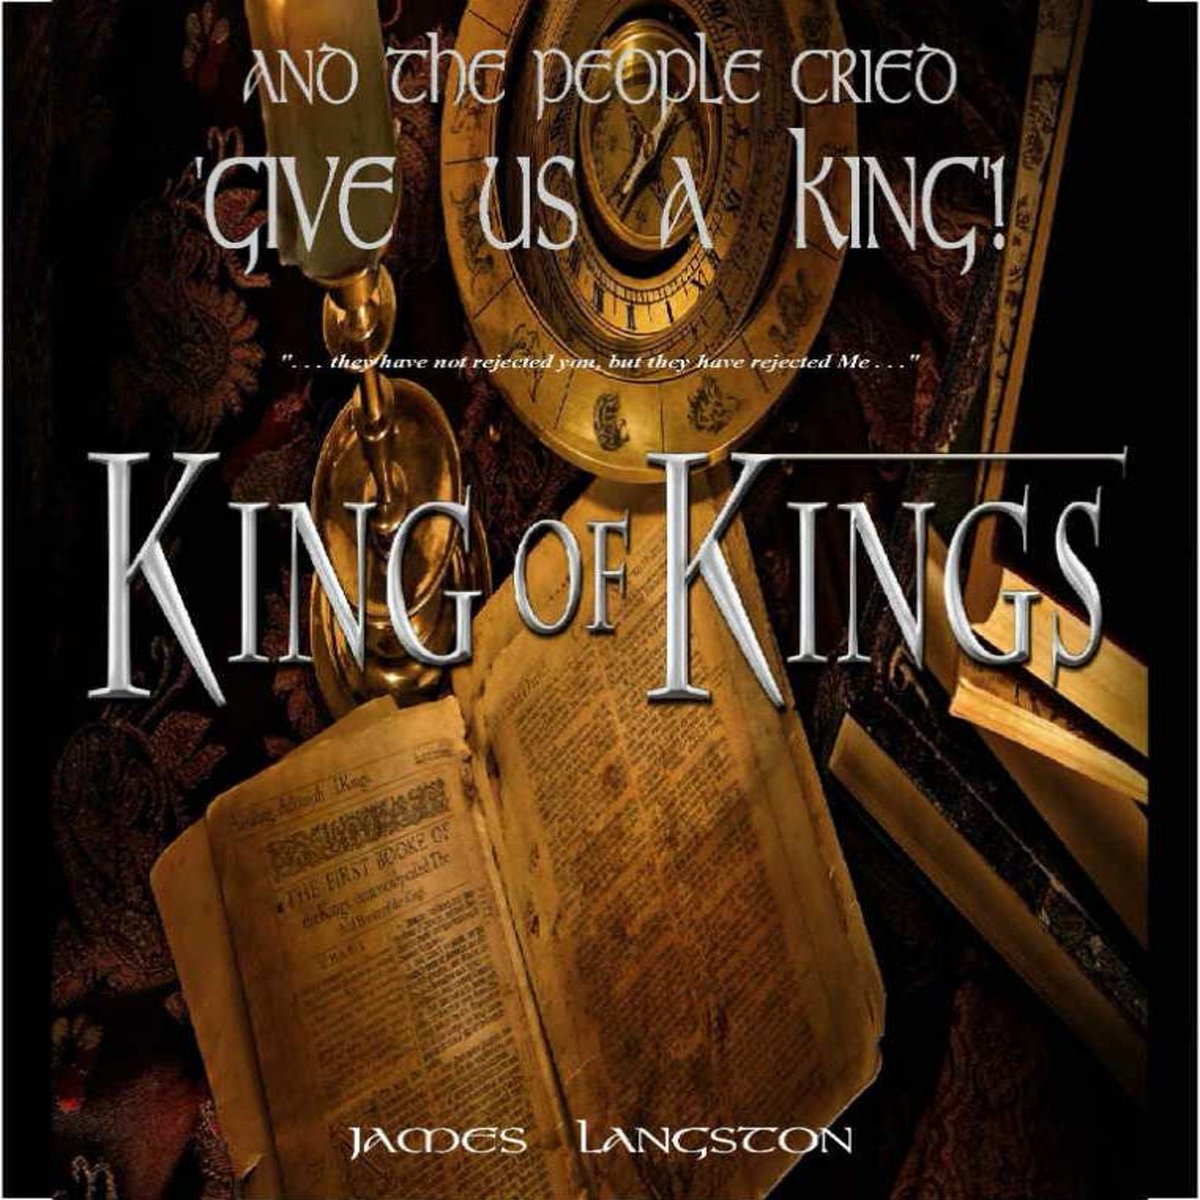 'And the People Cried, 'Give Us A King'! (Paperback/James Langston/$10.55/172 pages) [zcu.io/fUqr] Our nation is in trouble. If we do not fix our systemic issues, & soon, we may run out of time. #inspiration #Motivation #CivilUnrest #rioting #poverty #BookOfTheMonth